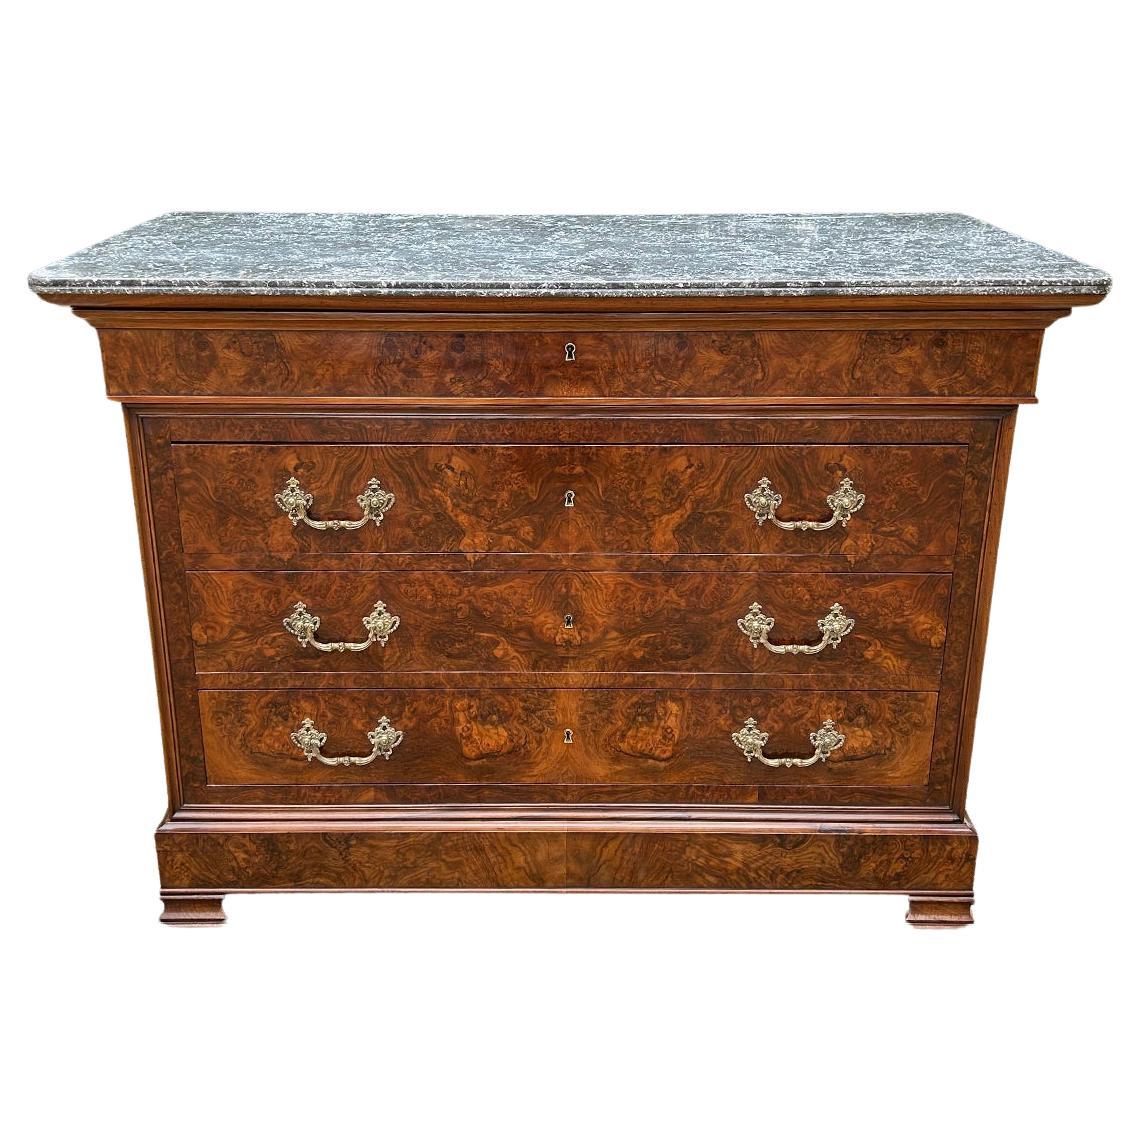 19th Century French Burr Walnut Commode / Chest of Drawers with Marble Top